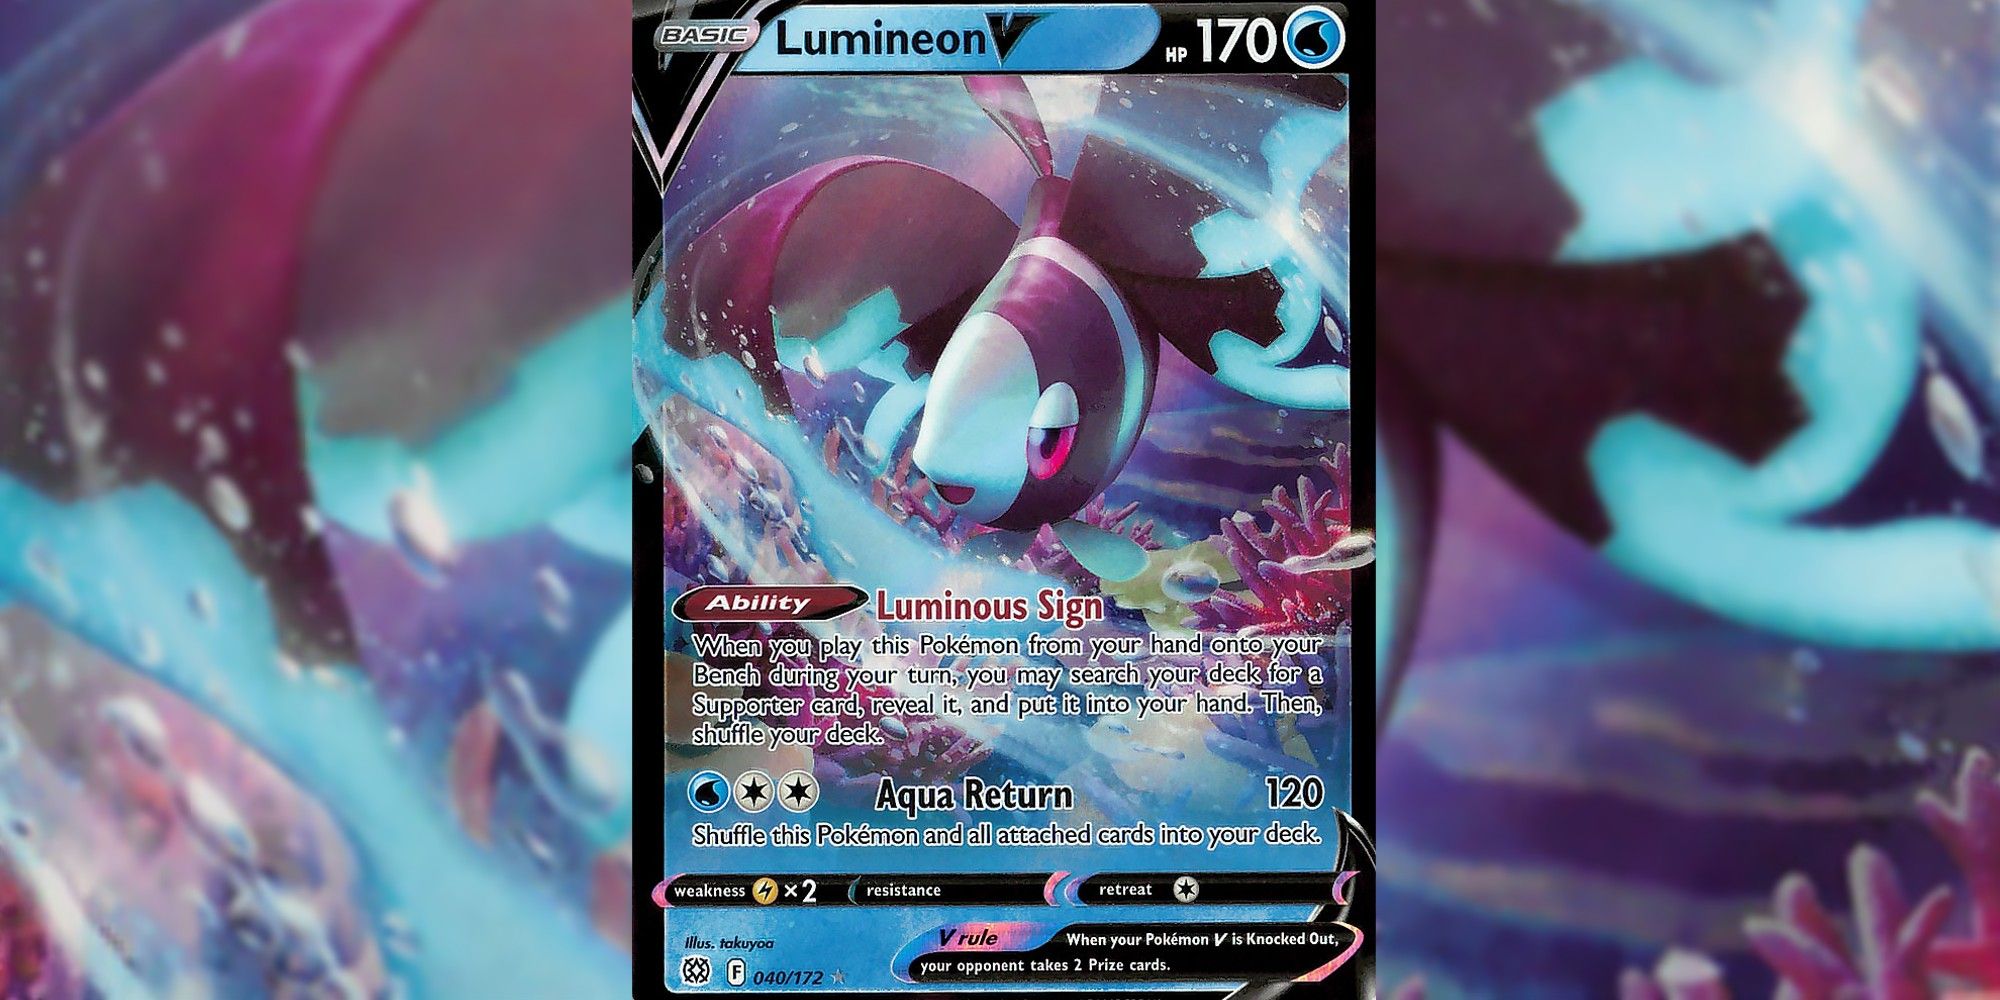 Lumineon V card with blurred background